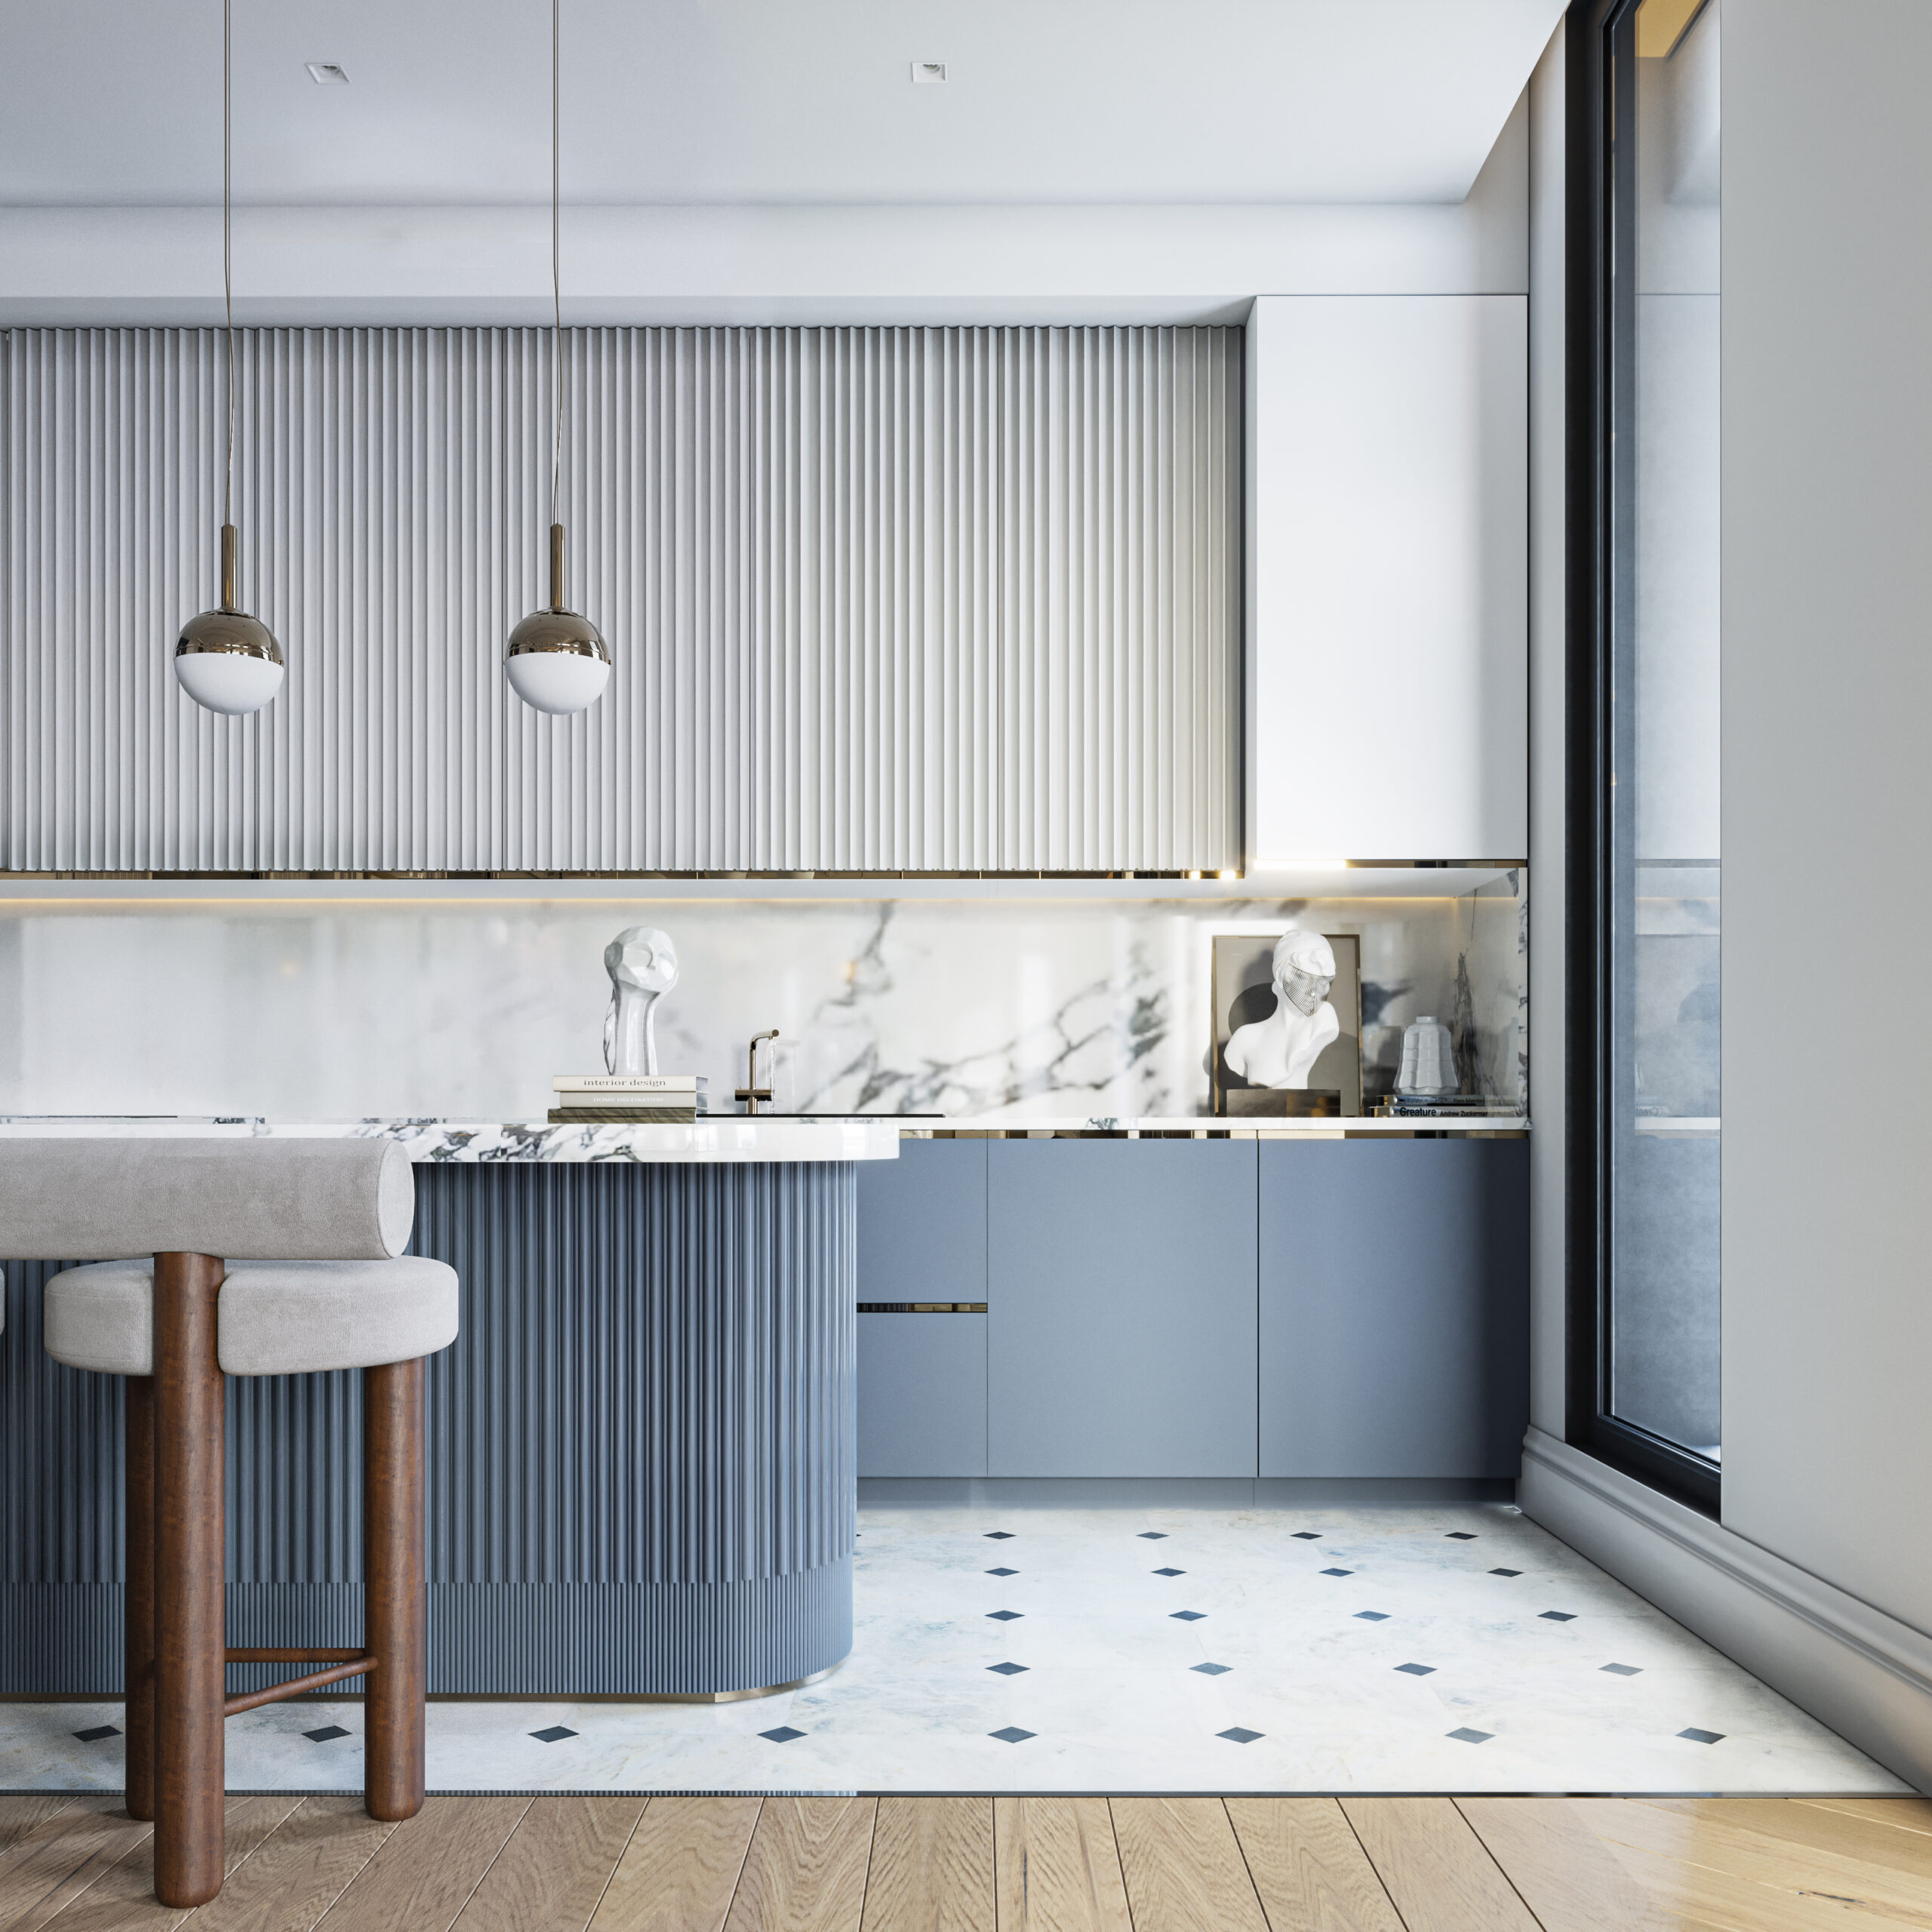 Whether it's wood or stone, concrete or composite that you are drawn to, there are lots of kitchen worktops to choose from. Follow this expert buyer's guide by interior stylist Maxine Brady